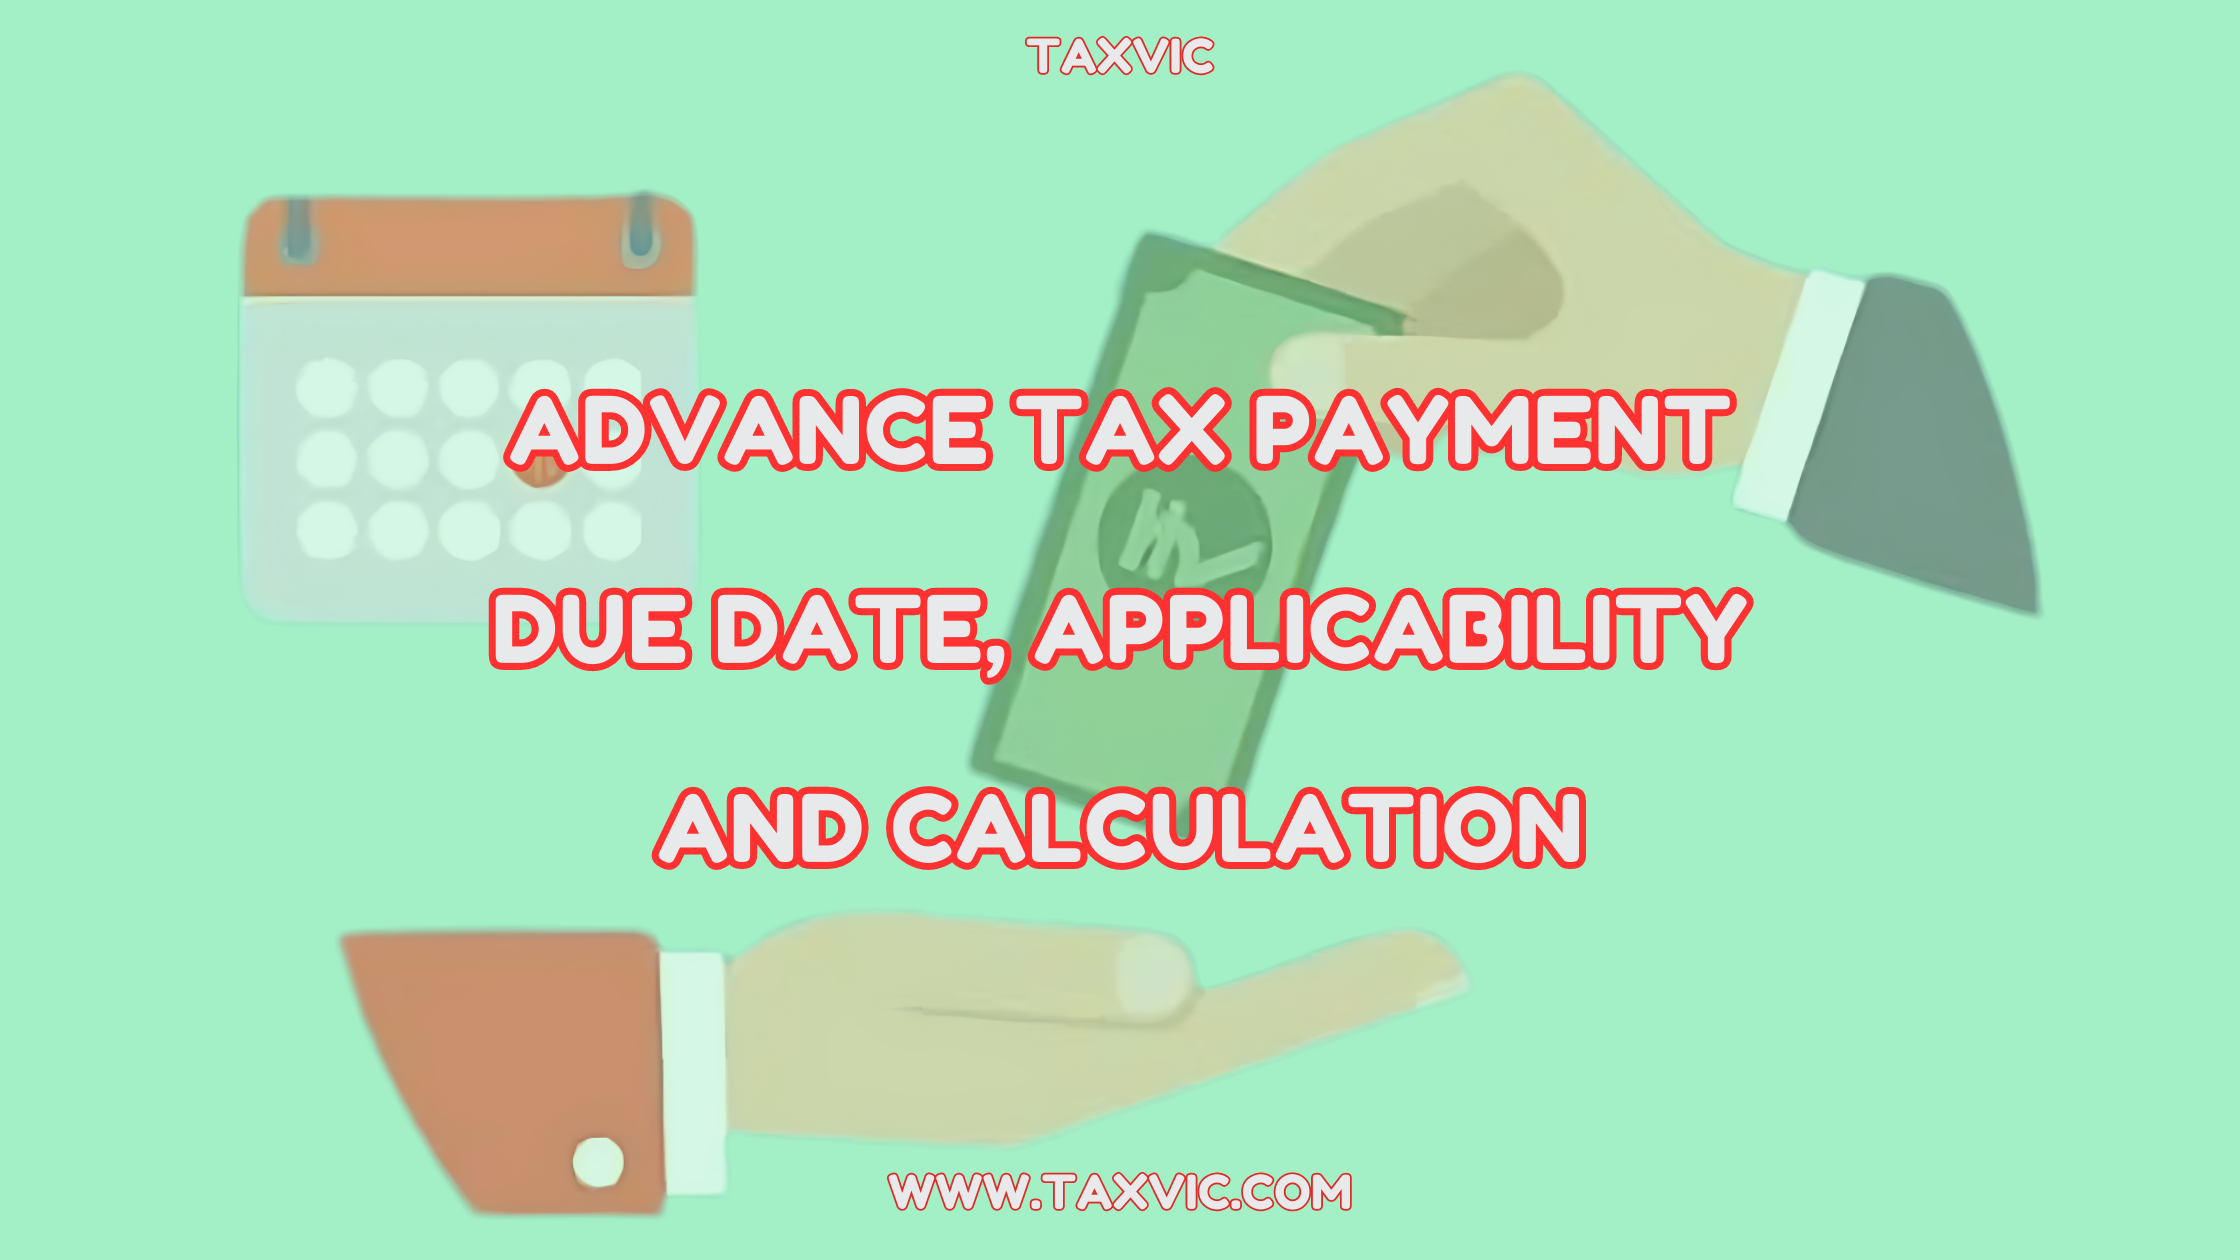 Advance Tax Payment Due date, Applicability and Calculation